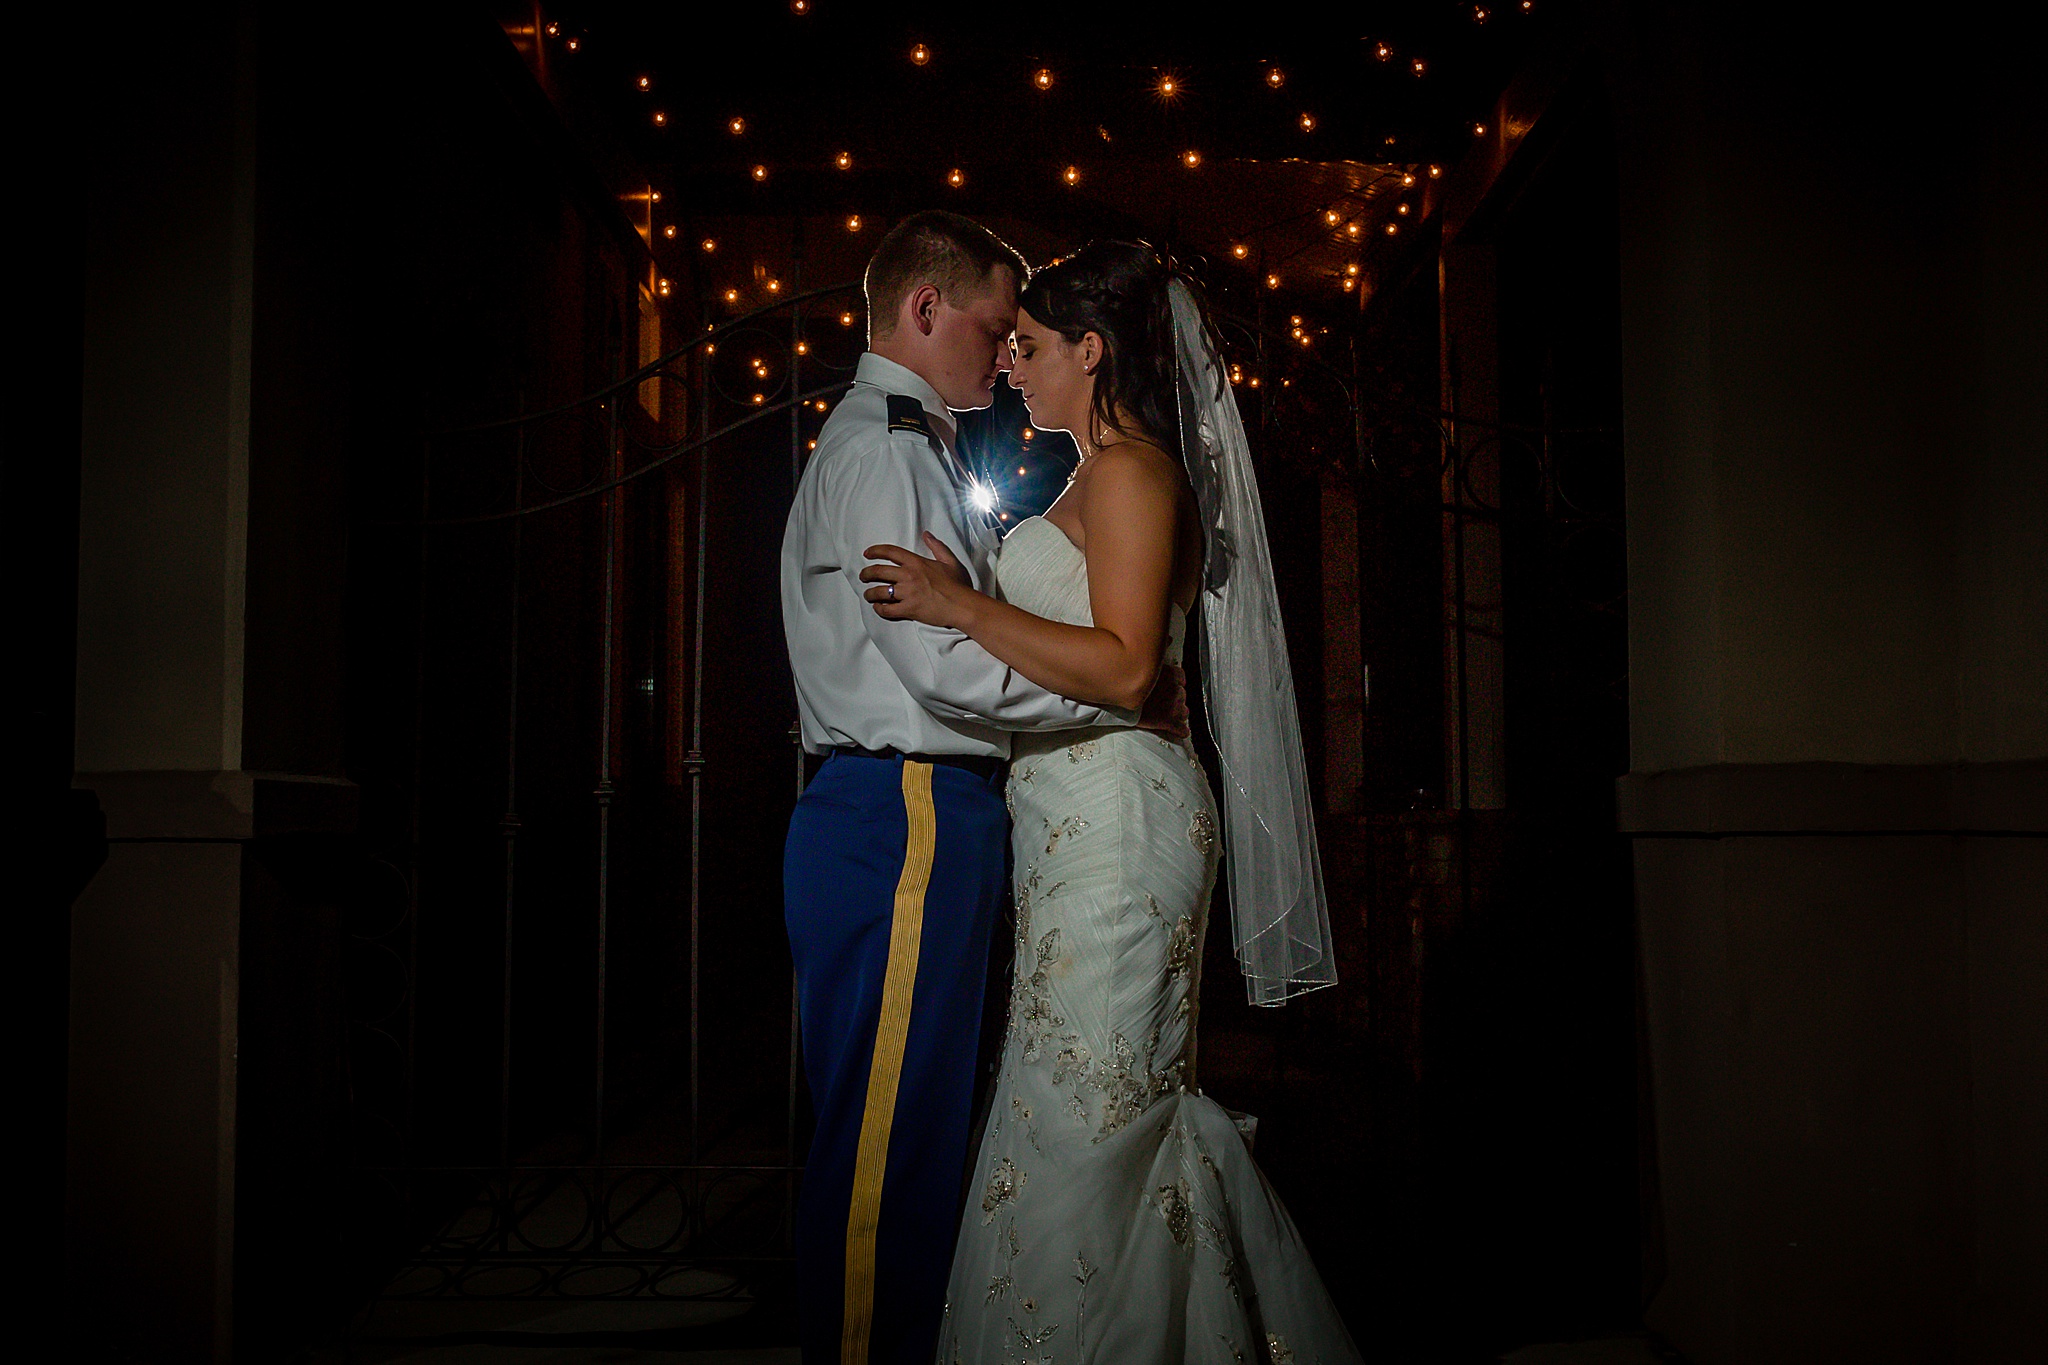 Bride & Groom portrait with string lights in the background. Tania & Chris' Denver Wedding at the Wedgewood Ken Caryl by Colorado Wedding Photography, Jennifer Garza. Colorado Wedding Photographer, Colorado Wedding Photography, Denver Wedding Photographer, Denver Wedding Photography, US Marine Corp Wedding, US Marine Corp, Military Wedding, US Marines, Wedgewood Weddings, Wedgewood Weddings Ken Caryl, Colorado Wedding, Denver Wedding, Wedding Photographer, Colorado Bride, Brides of Colorado